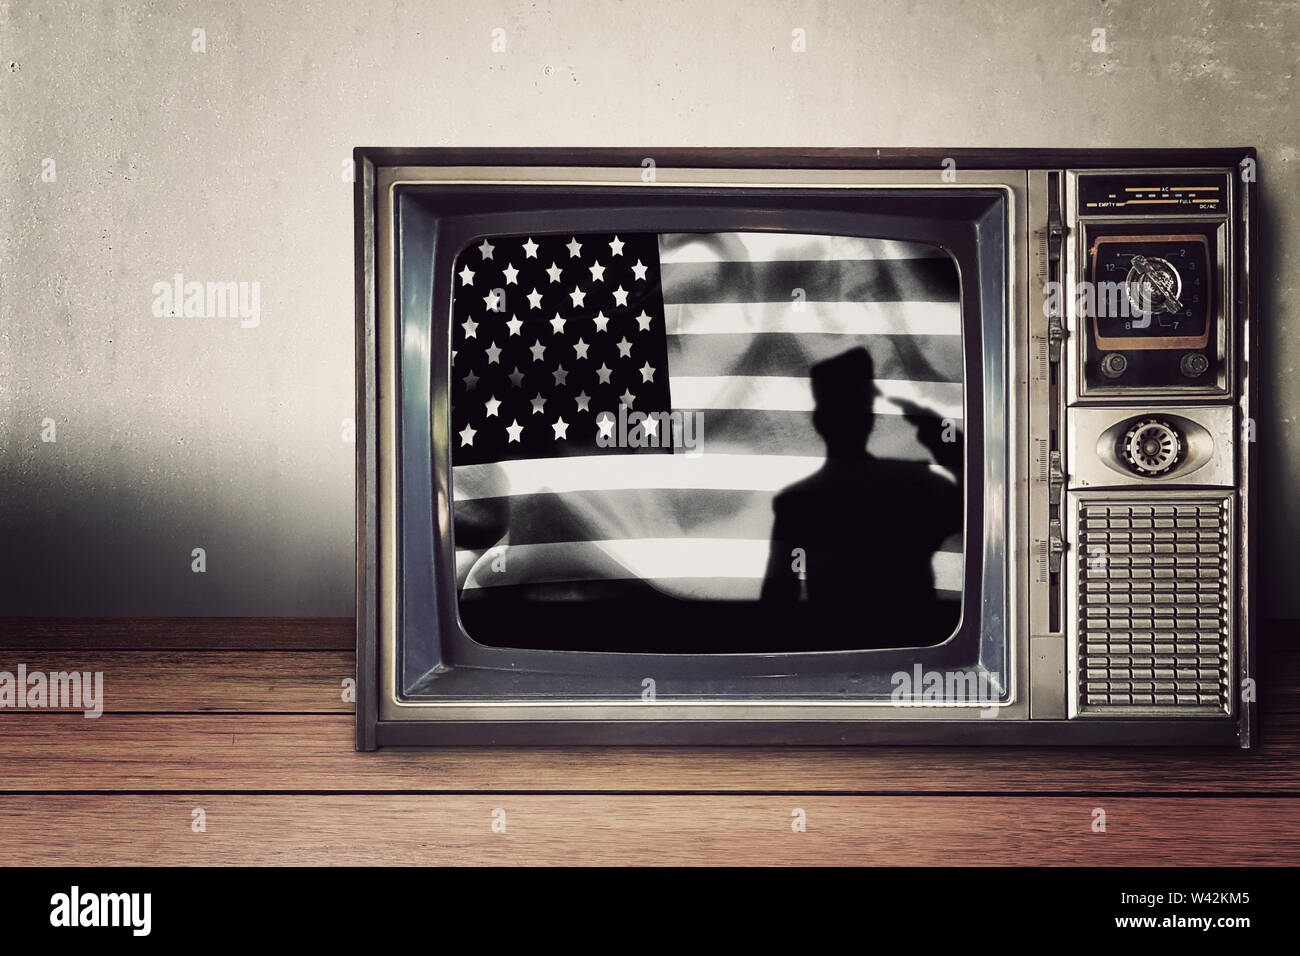 silhouette of soldier on american flag in vintage television on wooden table. Independence day , National american holiday. Stock Photo